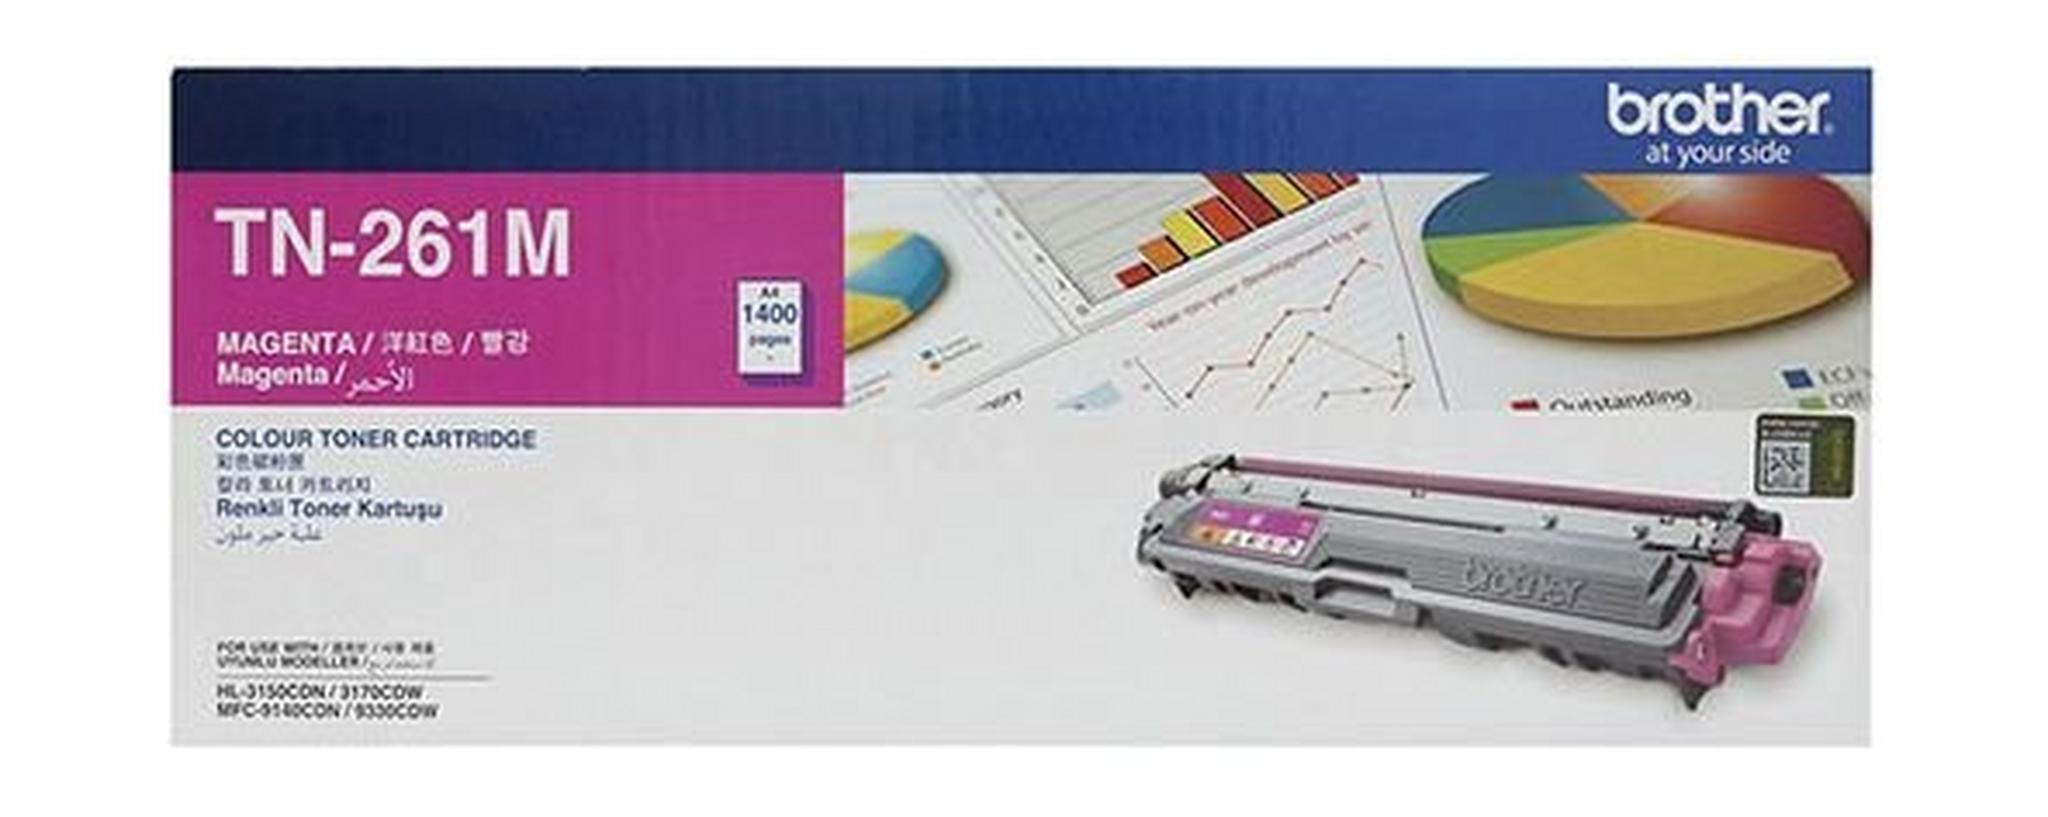 BROTHER Toner TN261M for LaserJet Printing 1400 Page Yield - Magenta (Single Colour Pack)